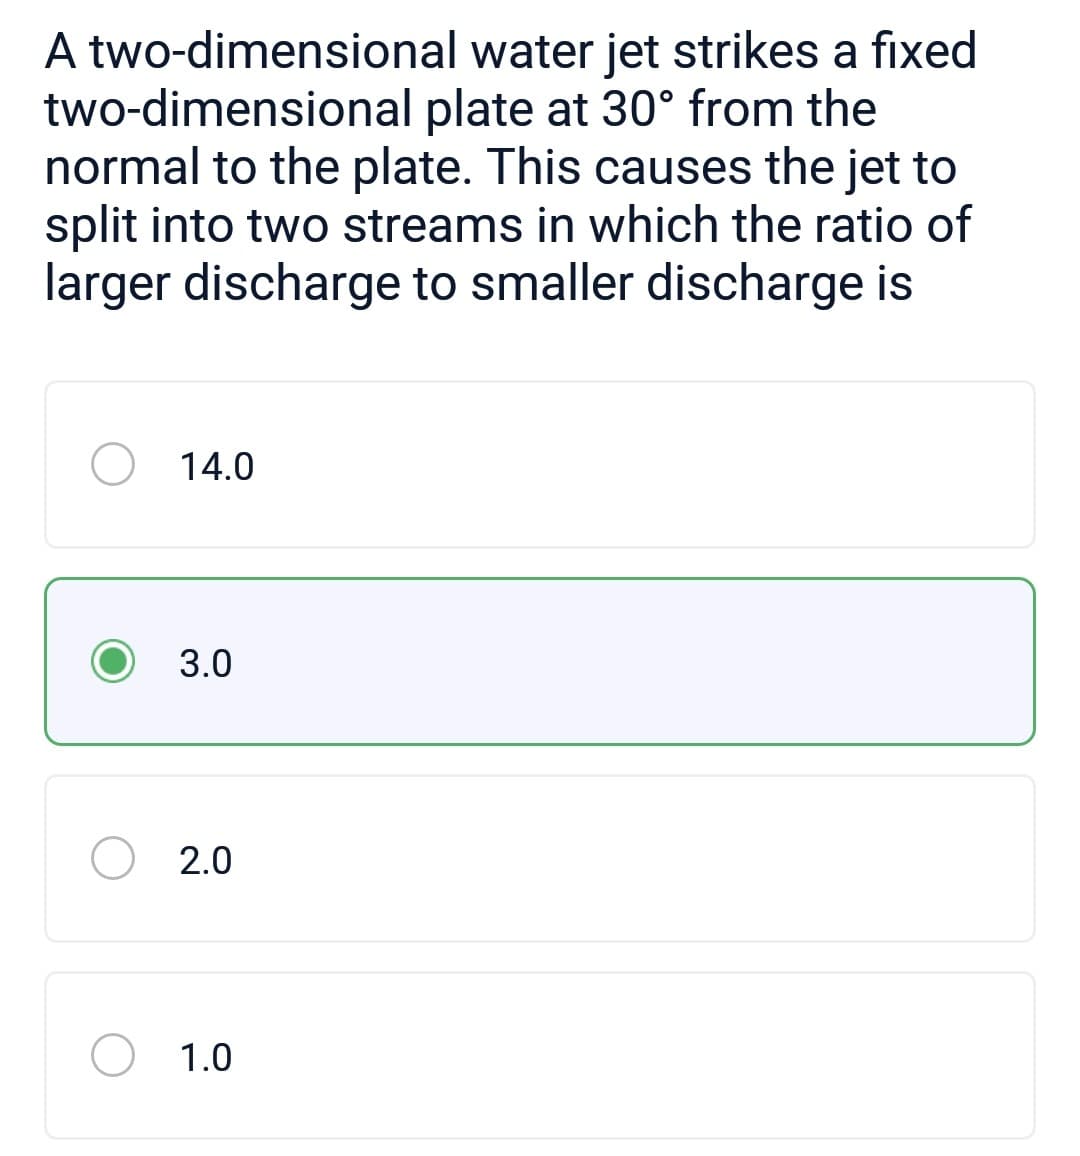 A two-dimensional
two-dimensional
normal to the plate. This causes the jet to
split into two streams in which the ratio of
larger discharge to smaller discharge is
14.0
3.0
O 2.0
water jet strikes a fixed
plate at 30° from the
1.0